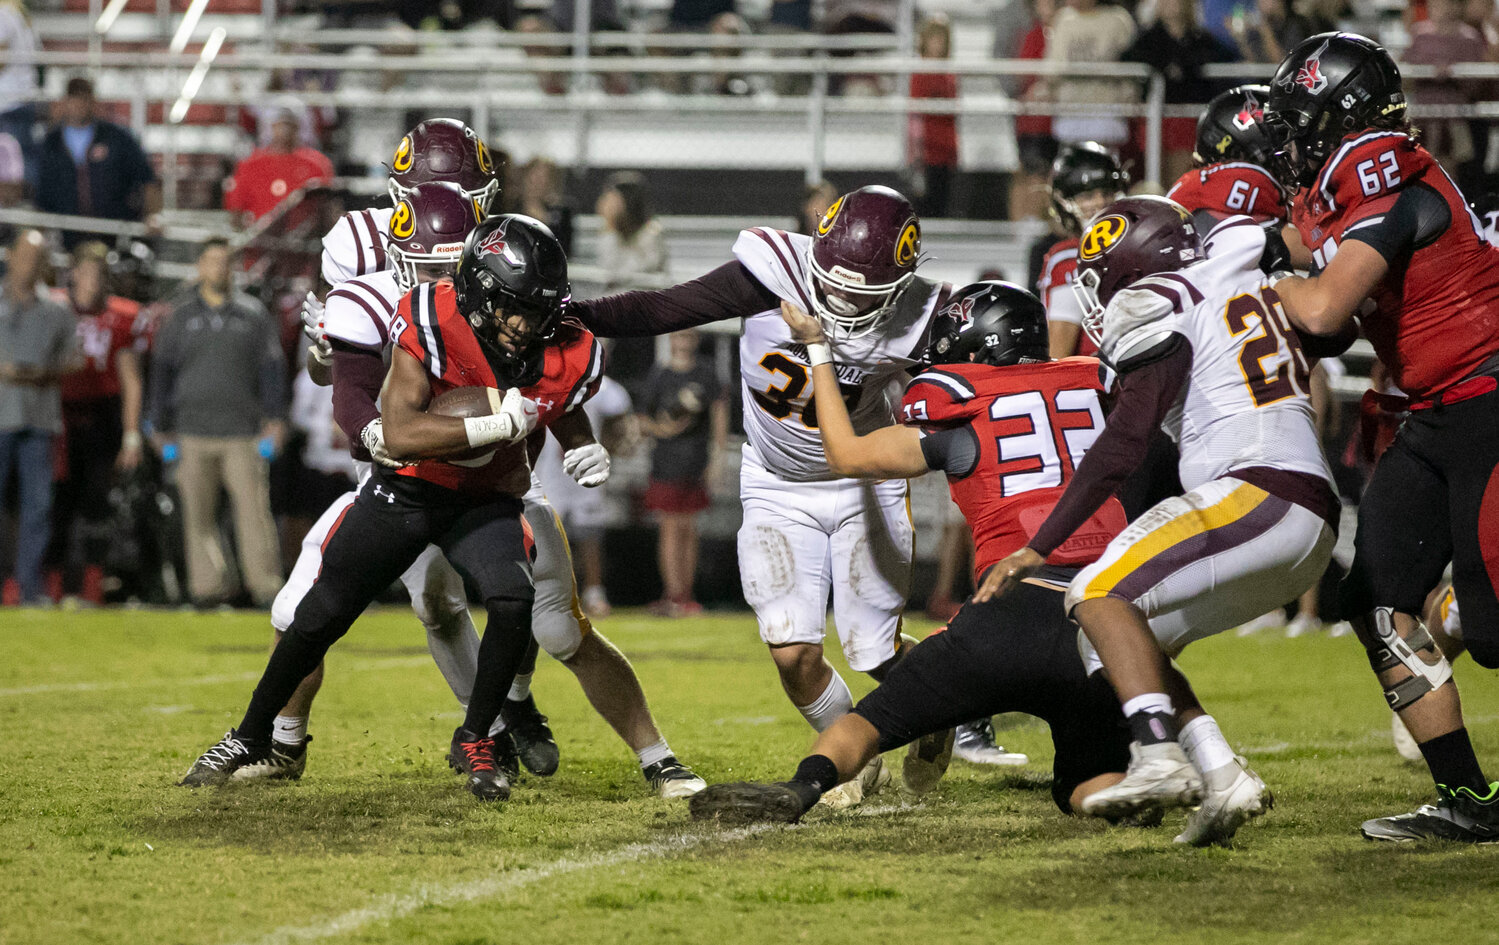 Robertsdale freshman Hunter Williams (46), senior Camden Johnson (30) and sophomore Aaron Coronilla (28) converge for a tackle of Spanish Fort sophomore Justin Vines (28) in the fourth quarter of Friday’s Class 6A Region 1 game between the Golden Bears and Toros. Spanish Fort emerged with a 45-0 win.